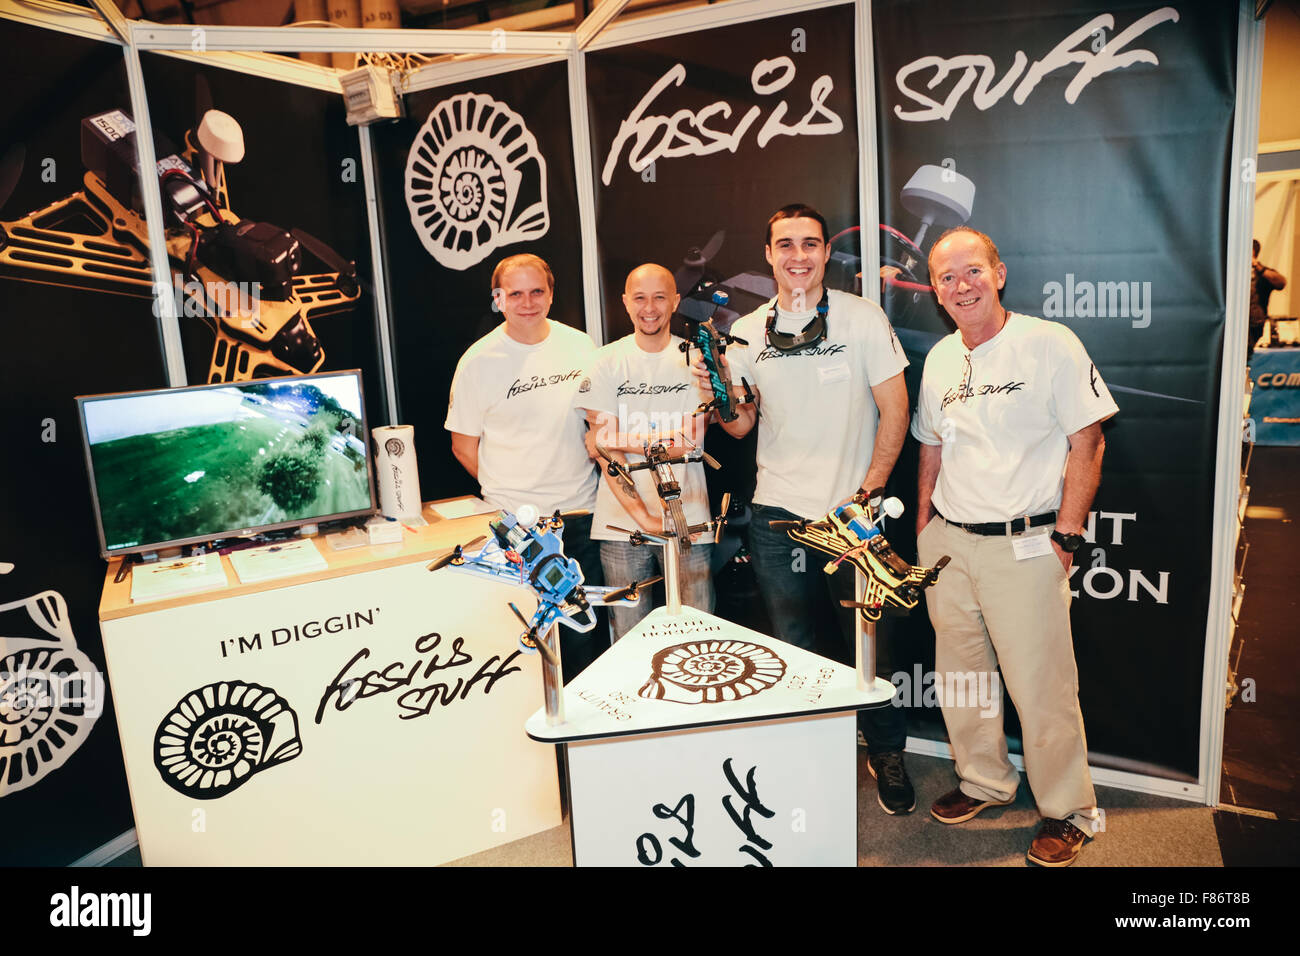 Birmingham, UK. 05th Dec, 2015. The UK Drone Show consumer drone fair, NEC conference centre, Birmingham, UK #ukdroneshow.  Pictured - Fossils Stuff's FPV (first person view) drone racing team pilots (l-r) Chris Weston, Jonny Banton and Tony  Marchant, with (r) Martin Rye, owner of Fossils Stuff.  Jonny is holding the new, as yet unreleased racing frame,  the 'Event Horizon'. © David Stock/Alamy Live News Credit:  David Stock/Alamy Live News Stock Photo